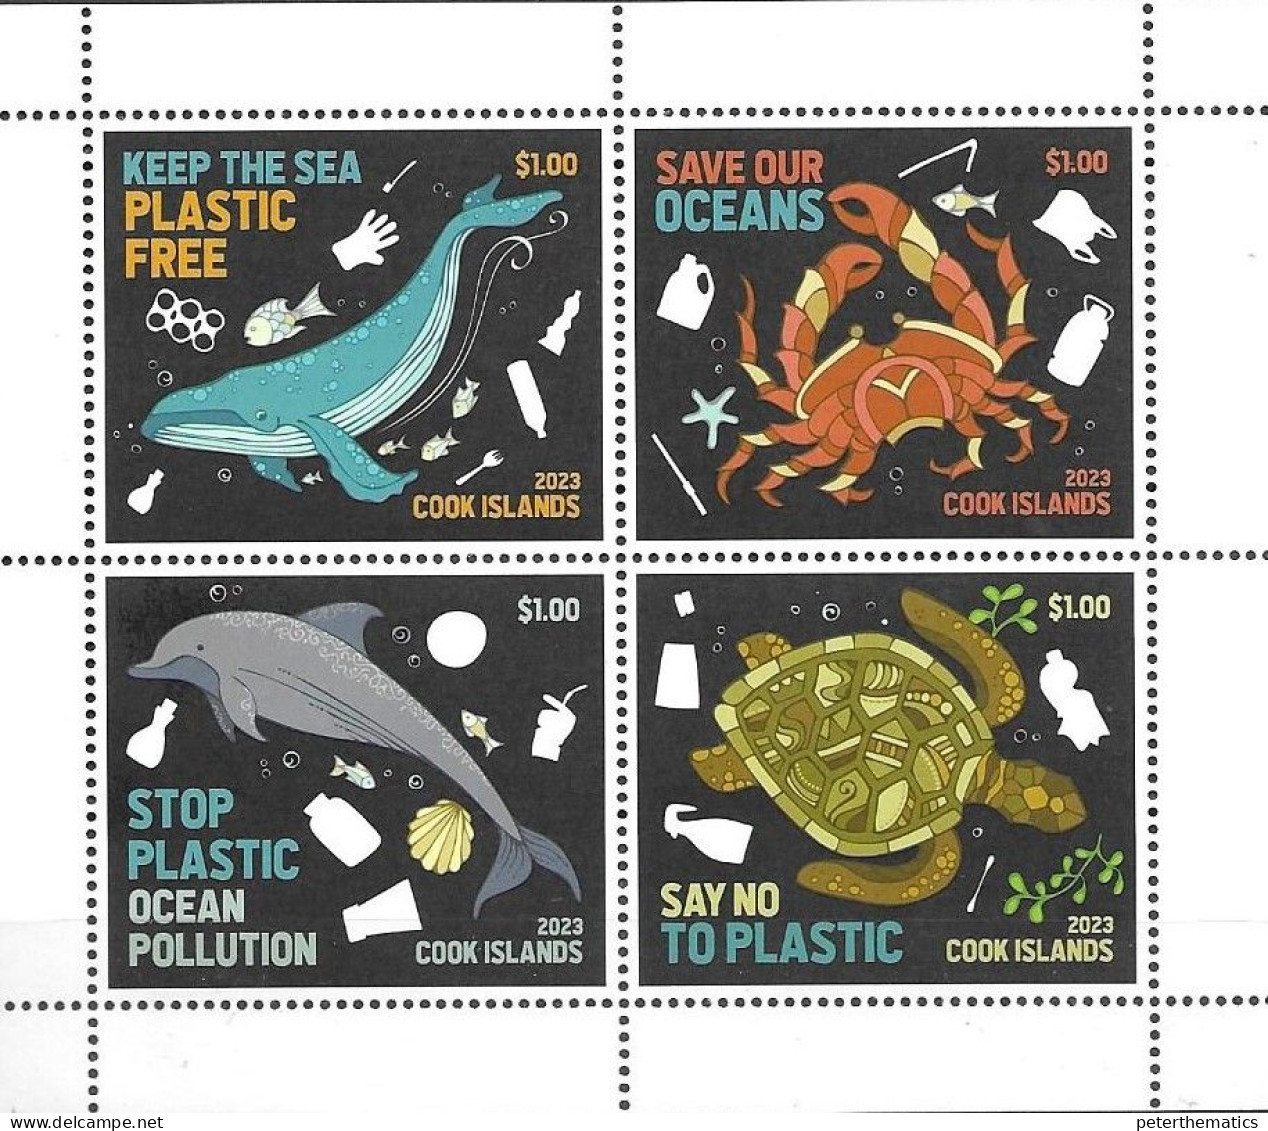 COOK ISLANDS, 2023, MNH, STOP PLASTIC POLLUTION, WHALES, DOLPHINS, TURTLES, CRABS,  SHEETLET OF 4v - Tortugas